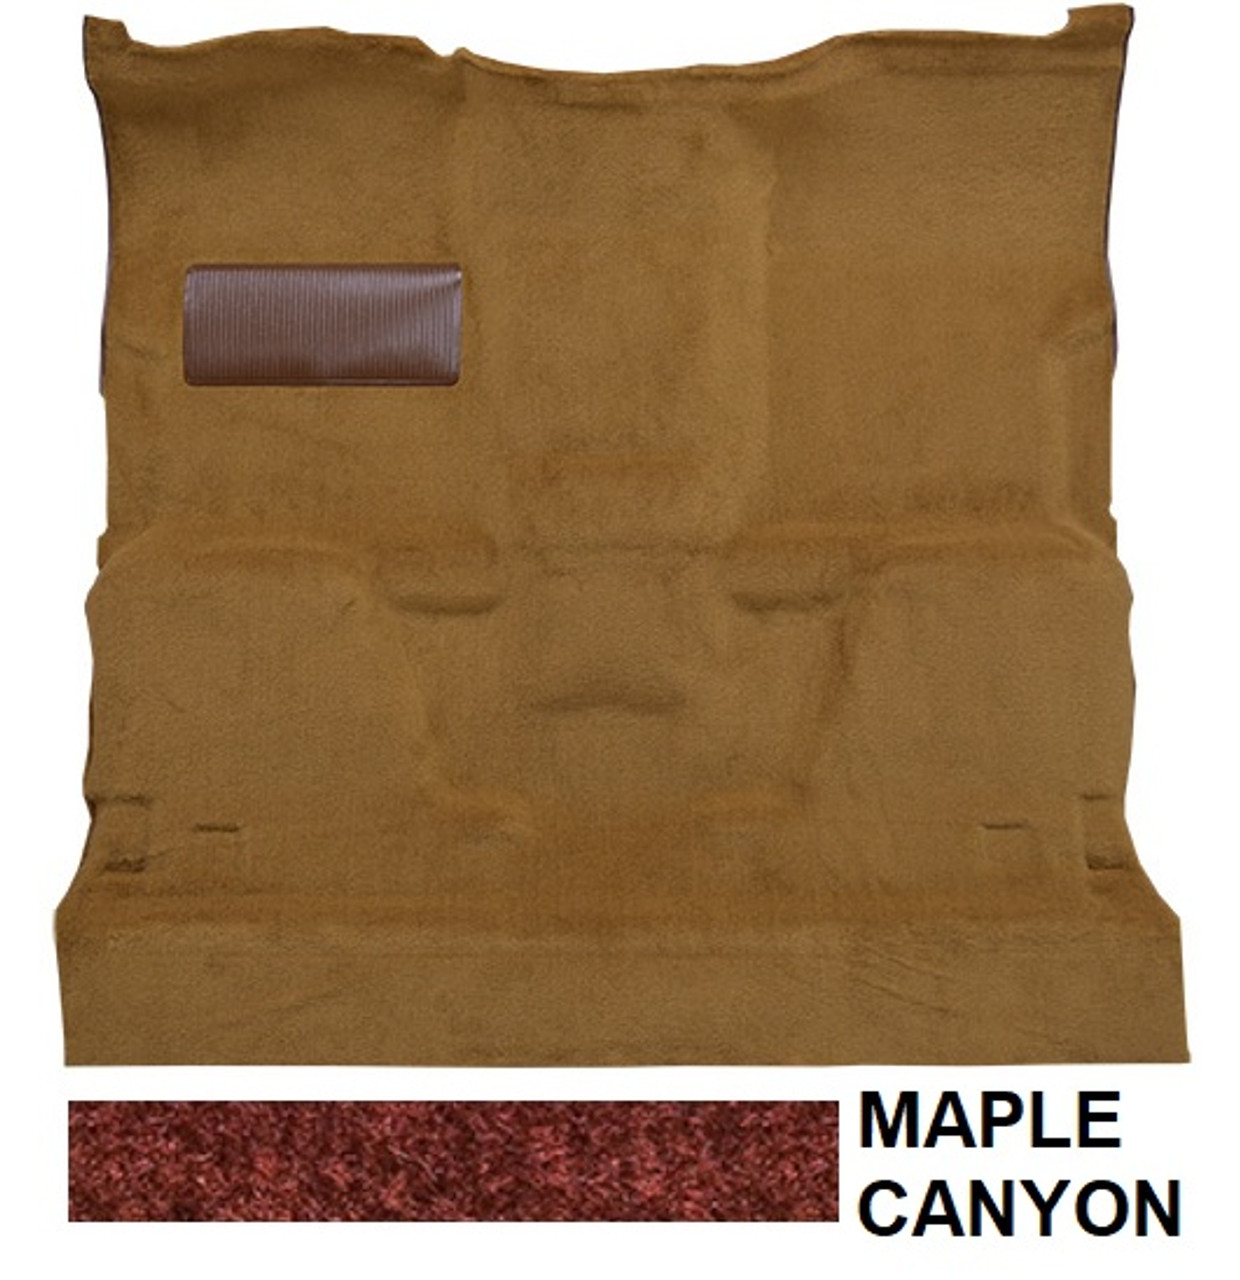 2WD #7298 Maple or Canyon Cutpile Carpet Set fits 1981-87 Chevy GMC Truck ea.